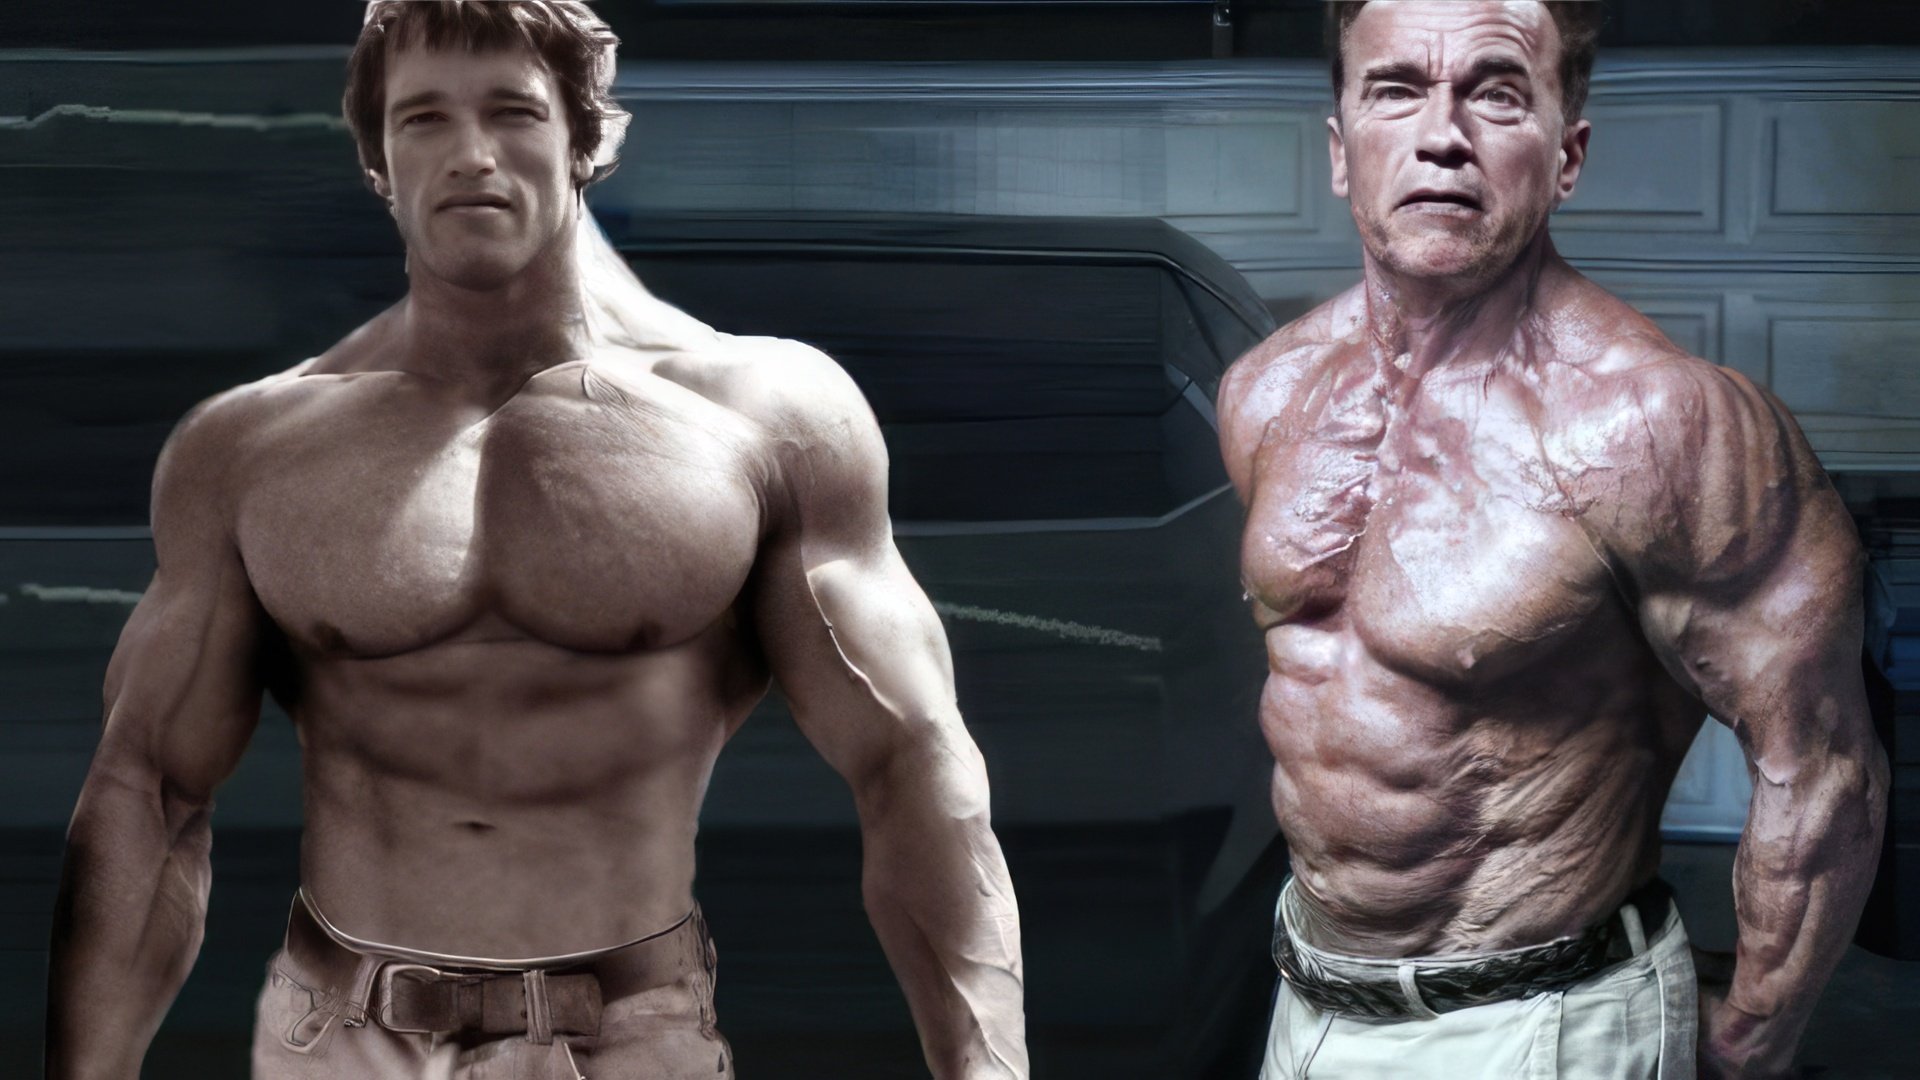 Schwarzenegger in his youth and now